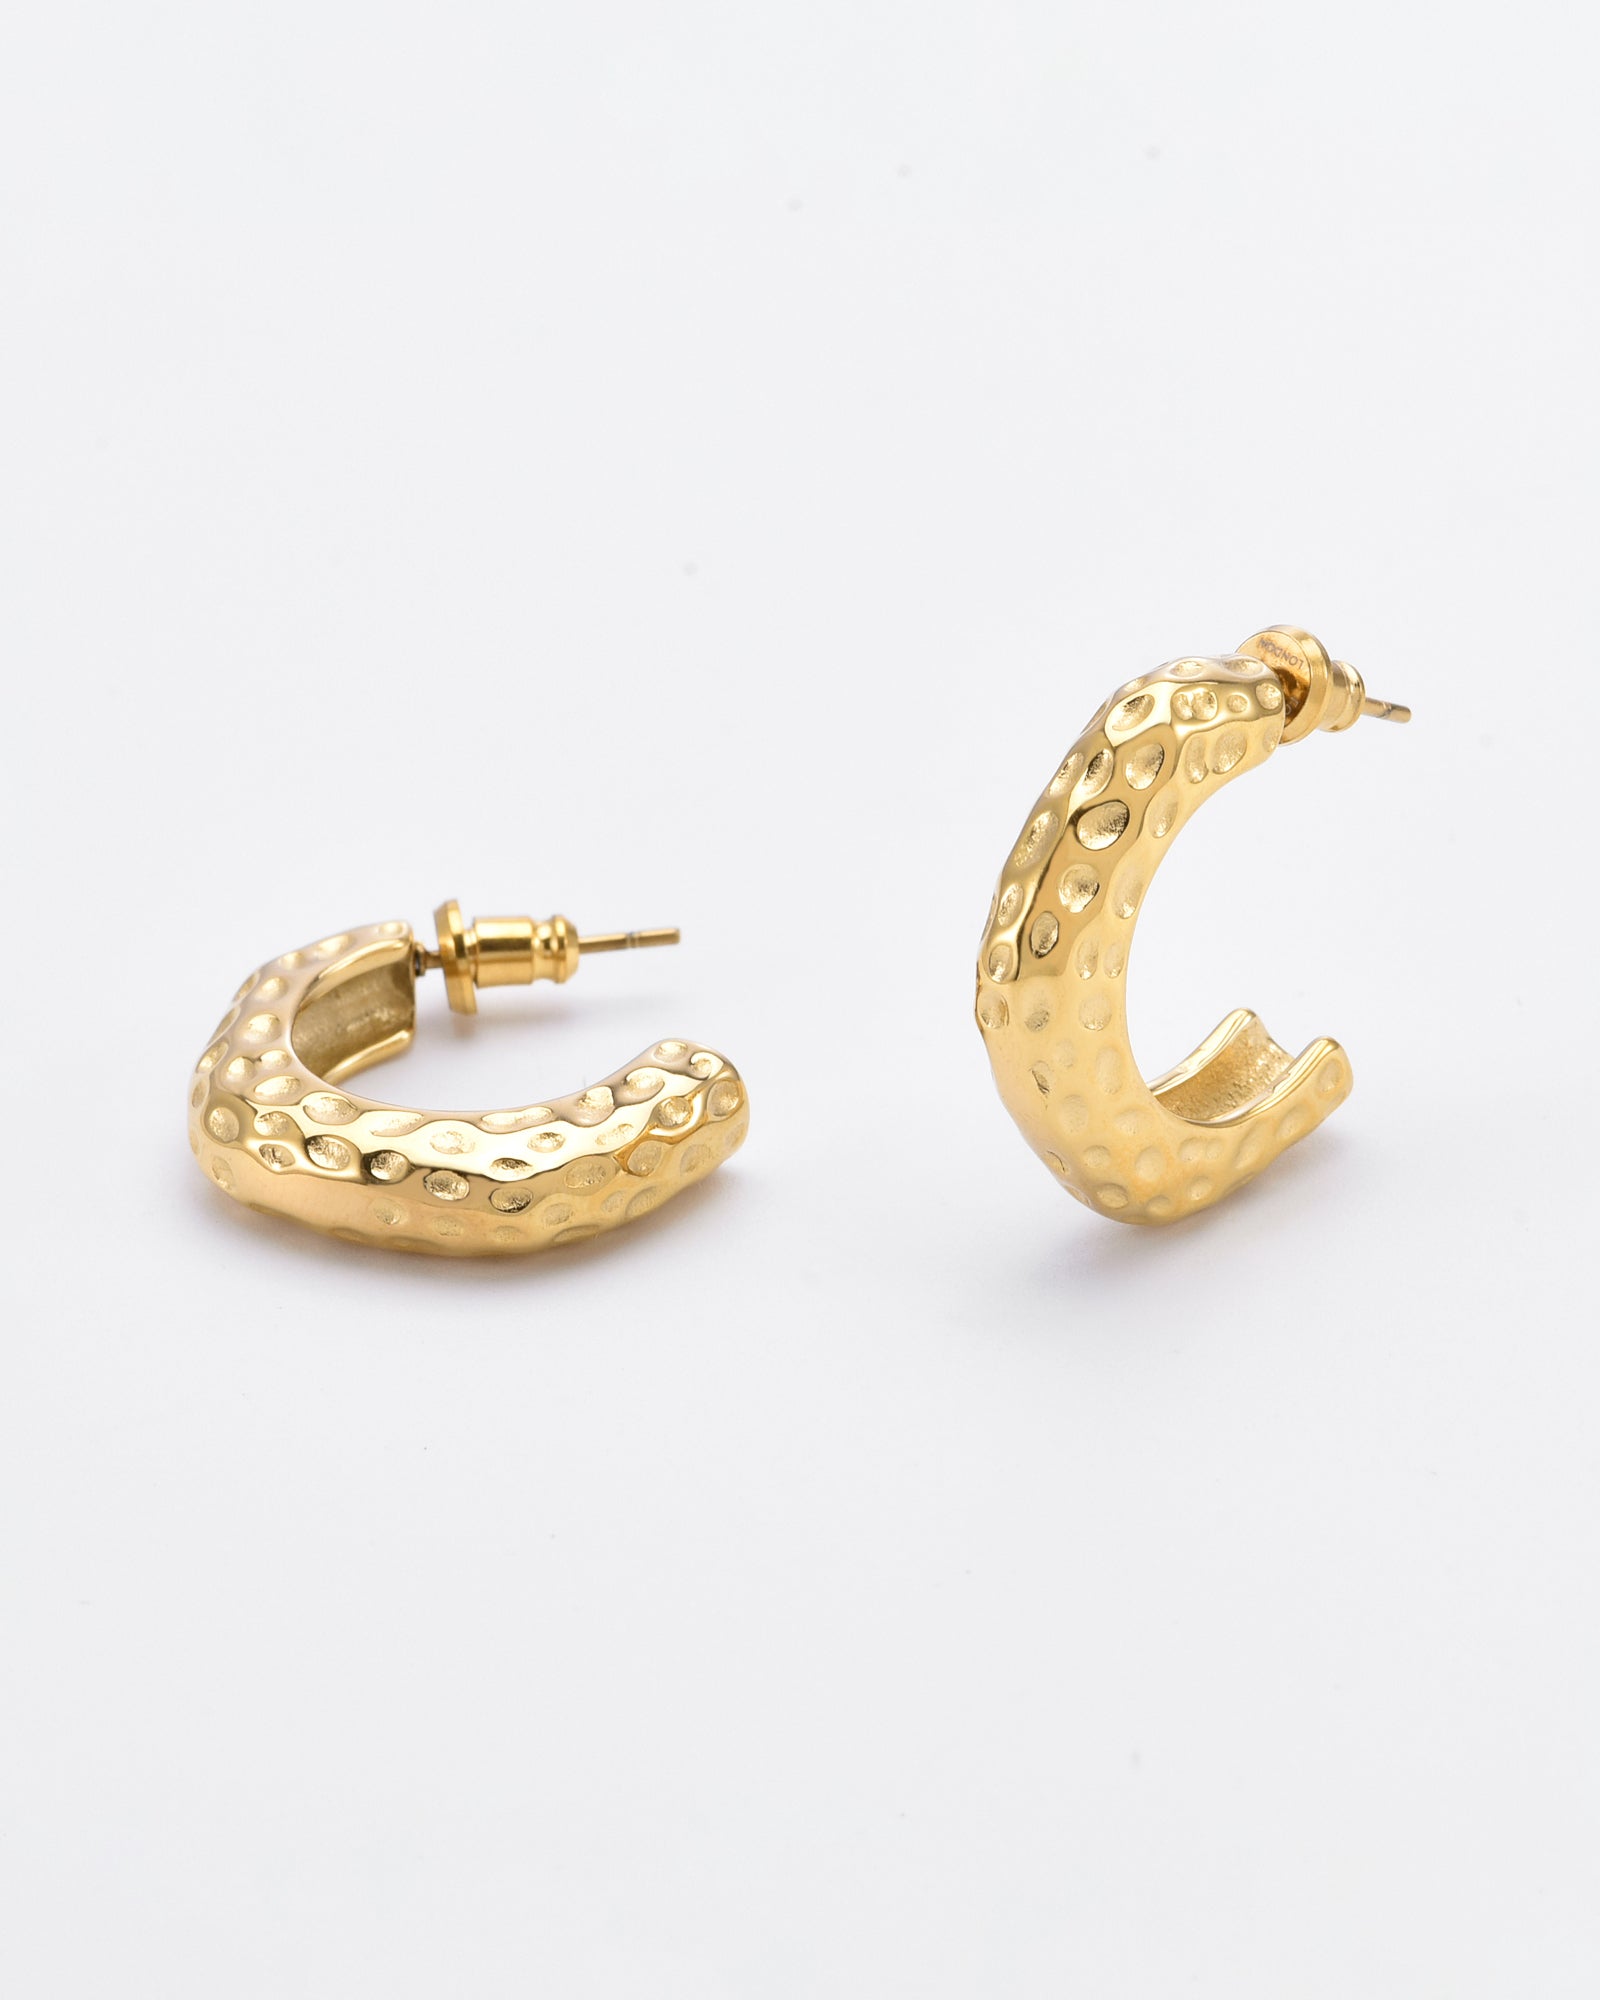 A pair of For Art's Sake® Mia Earrings Gold are shown against a plain white background. The gold-plated earrings boast a textured surface with a hammered appearance, featuring subtle dimples all over. One earring is standing upright, while the other lies flat.